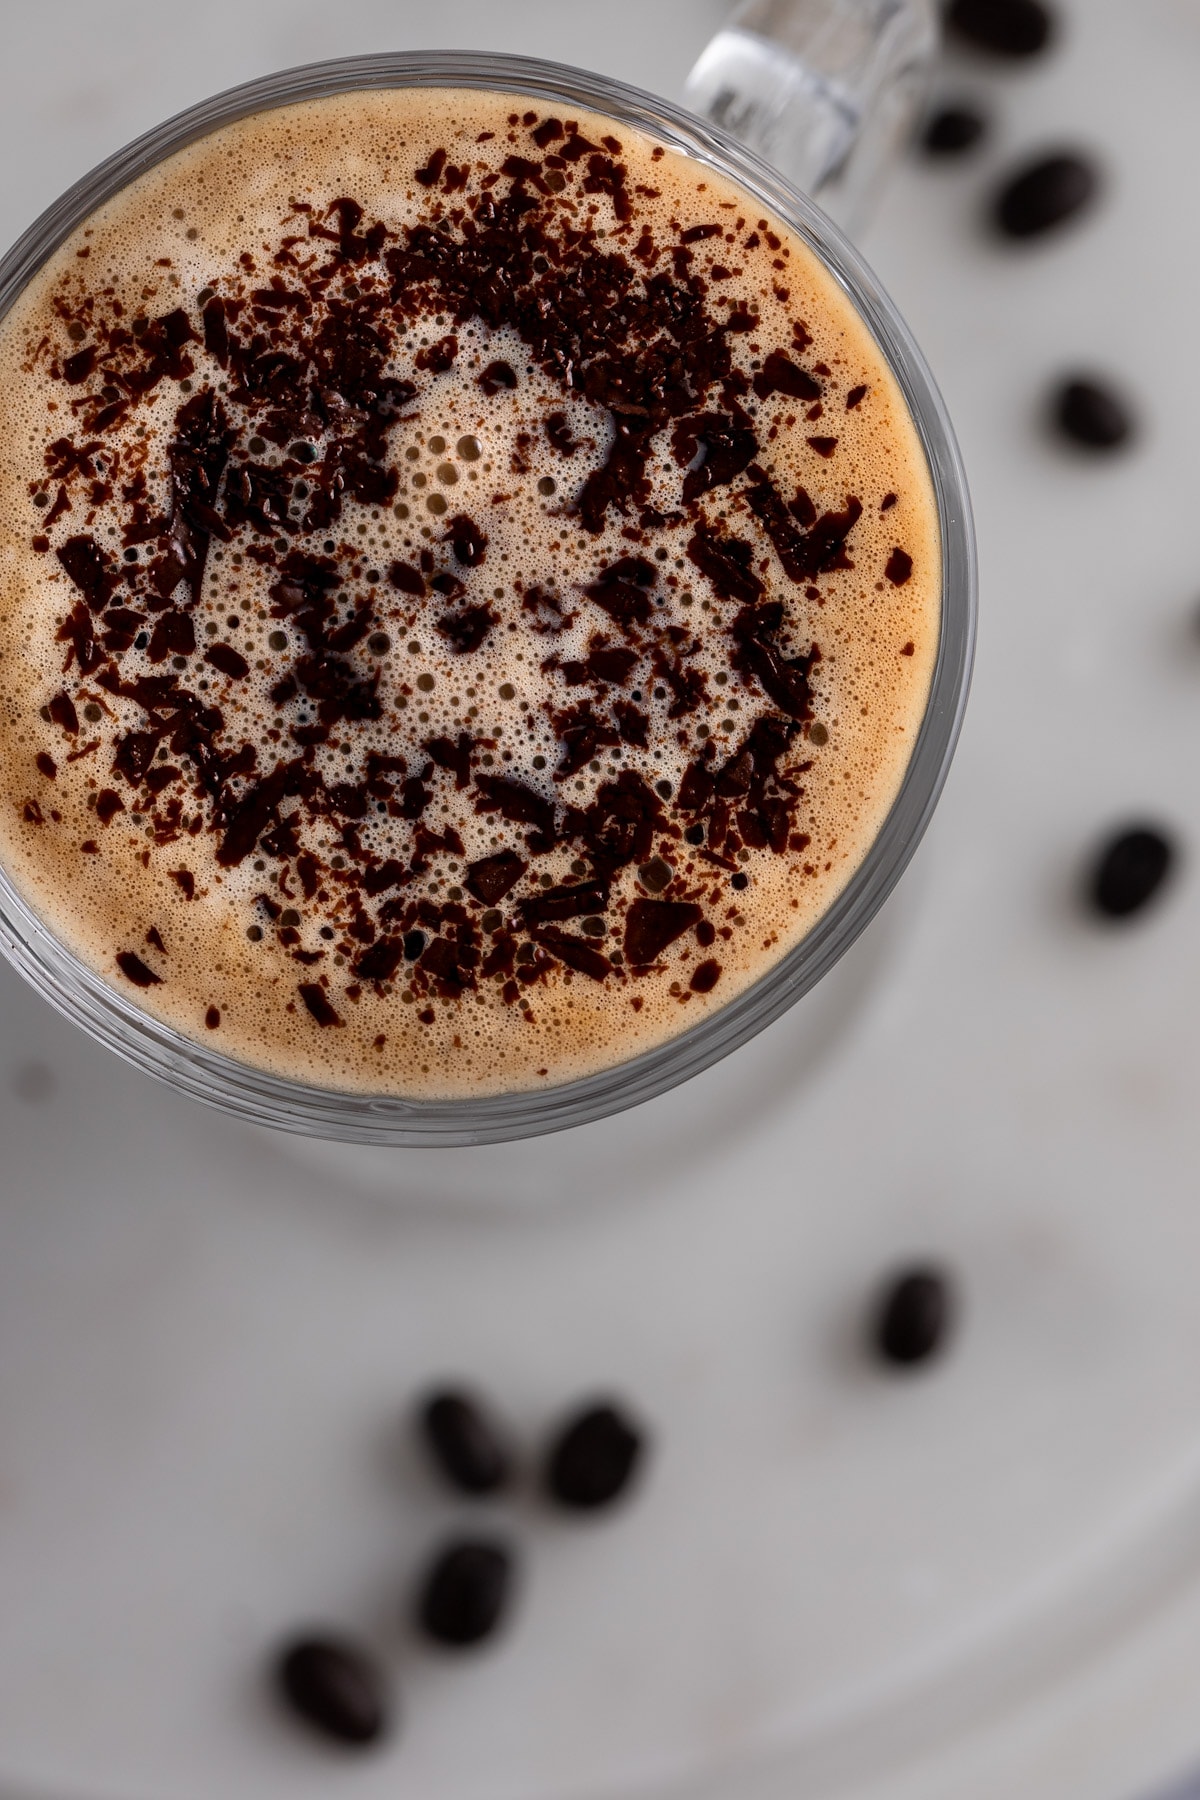 Overhead view of the baileys latte sprinkled with chocolate shavings, on a white background.